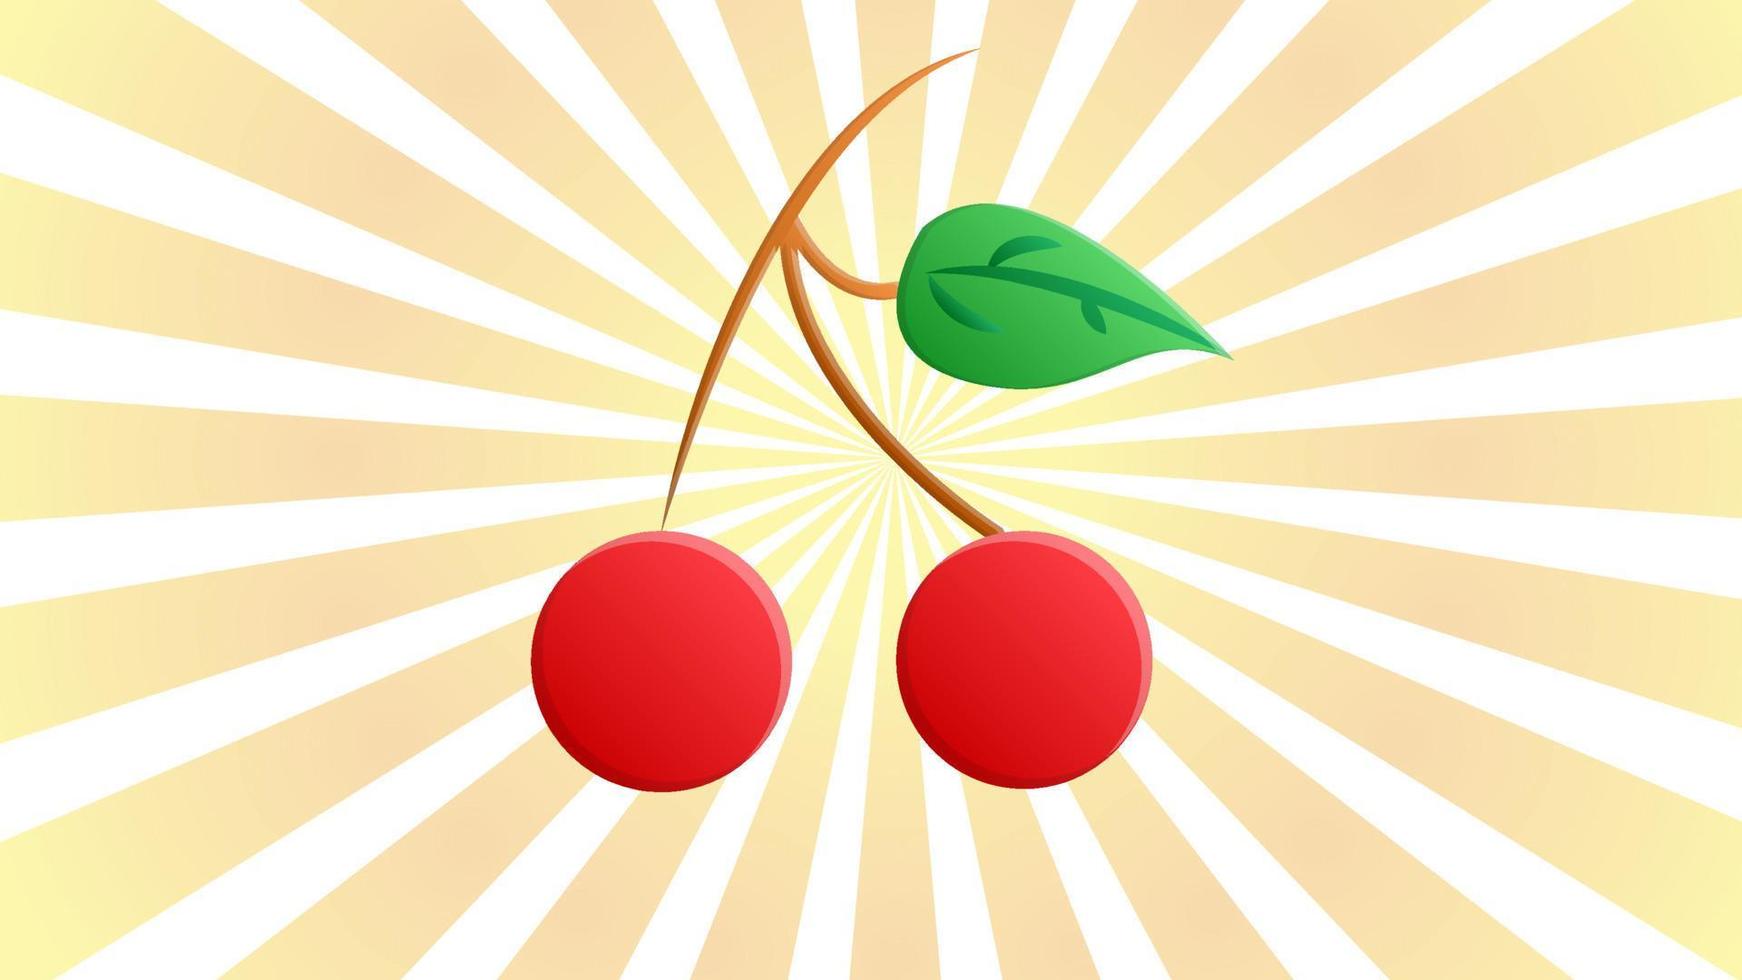 vector illustration. red small cherry on a bright retro background of white-orange color. two cherries on a brown twig. illustration with food. berries for food. healthy vegan food